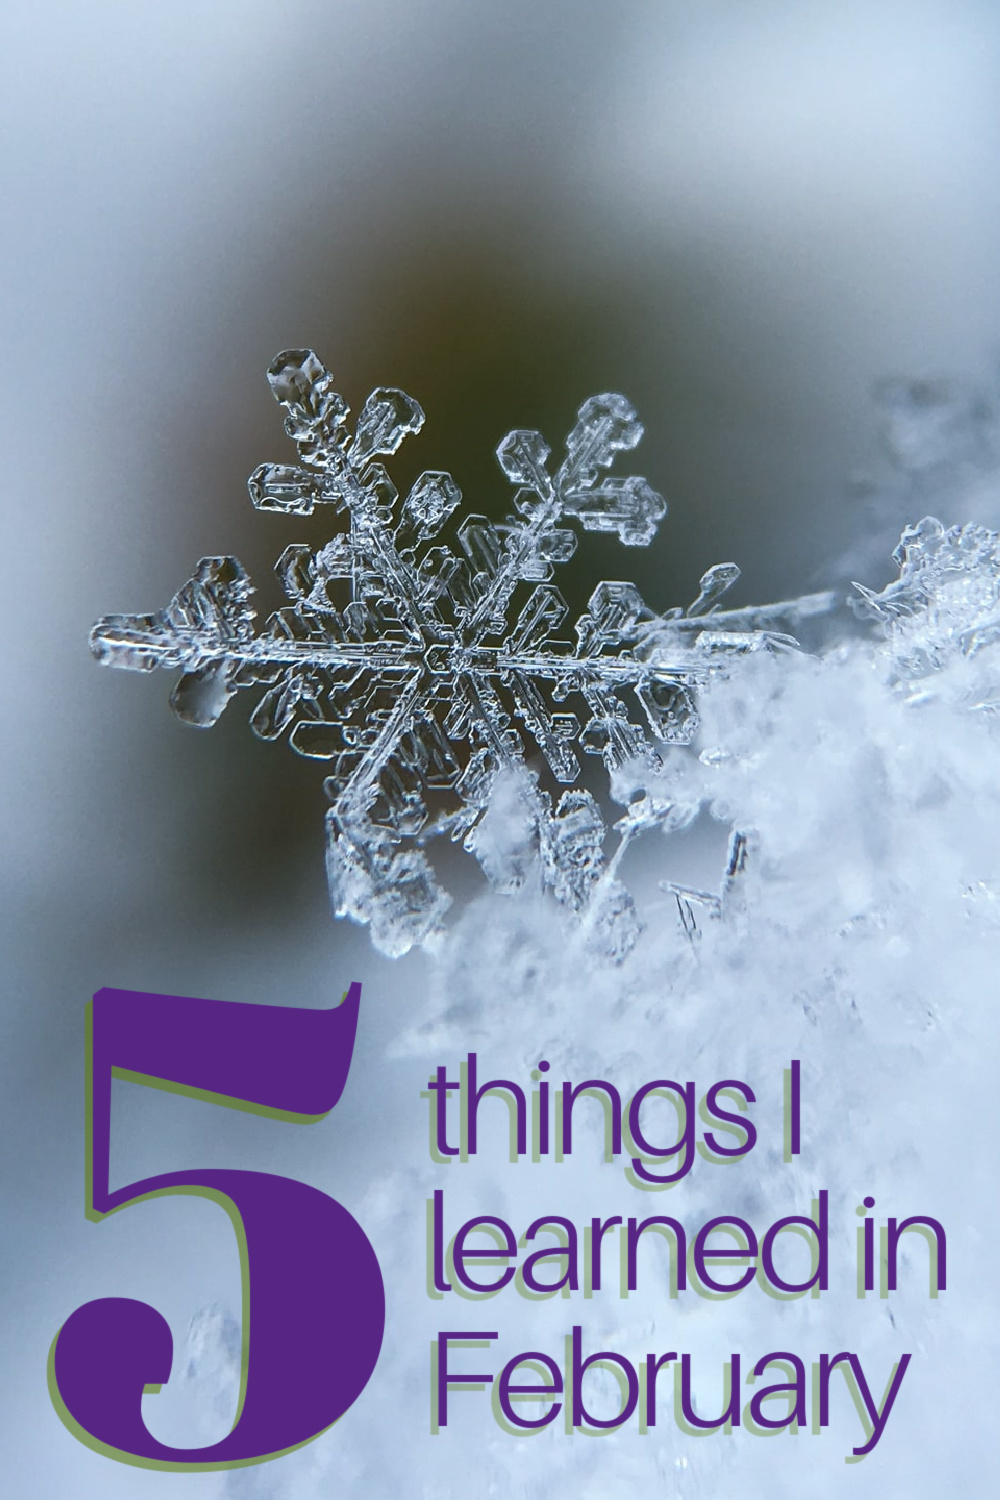 February was cold and snowy, but not nearly so bad as in many places. It was a month to be grateful for what we have. Here are 5 things I learned in the month of February.